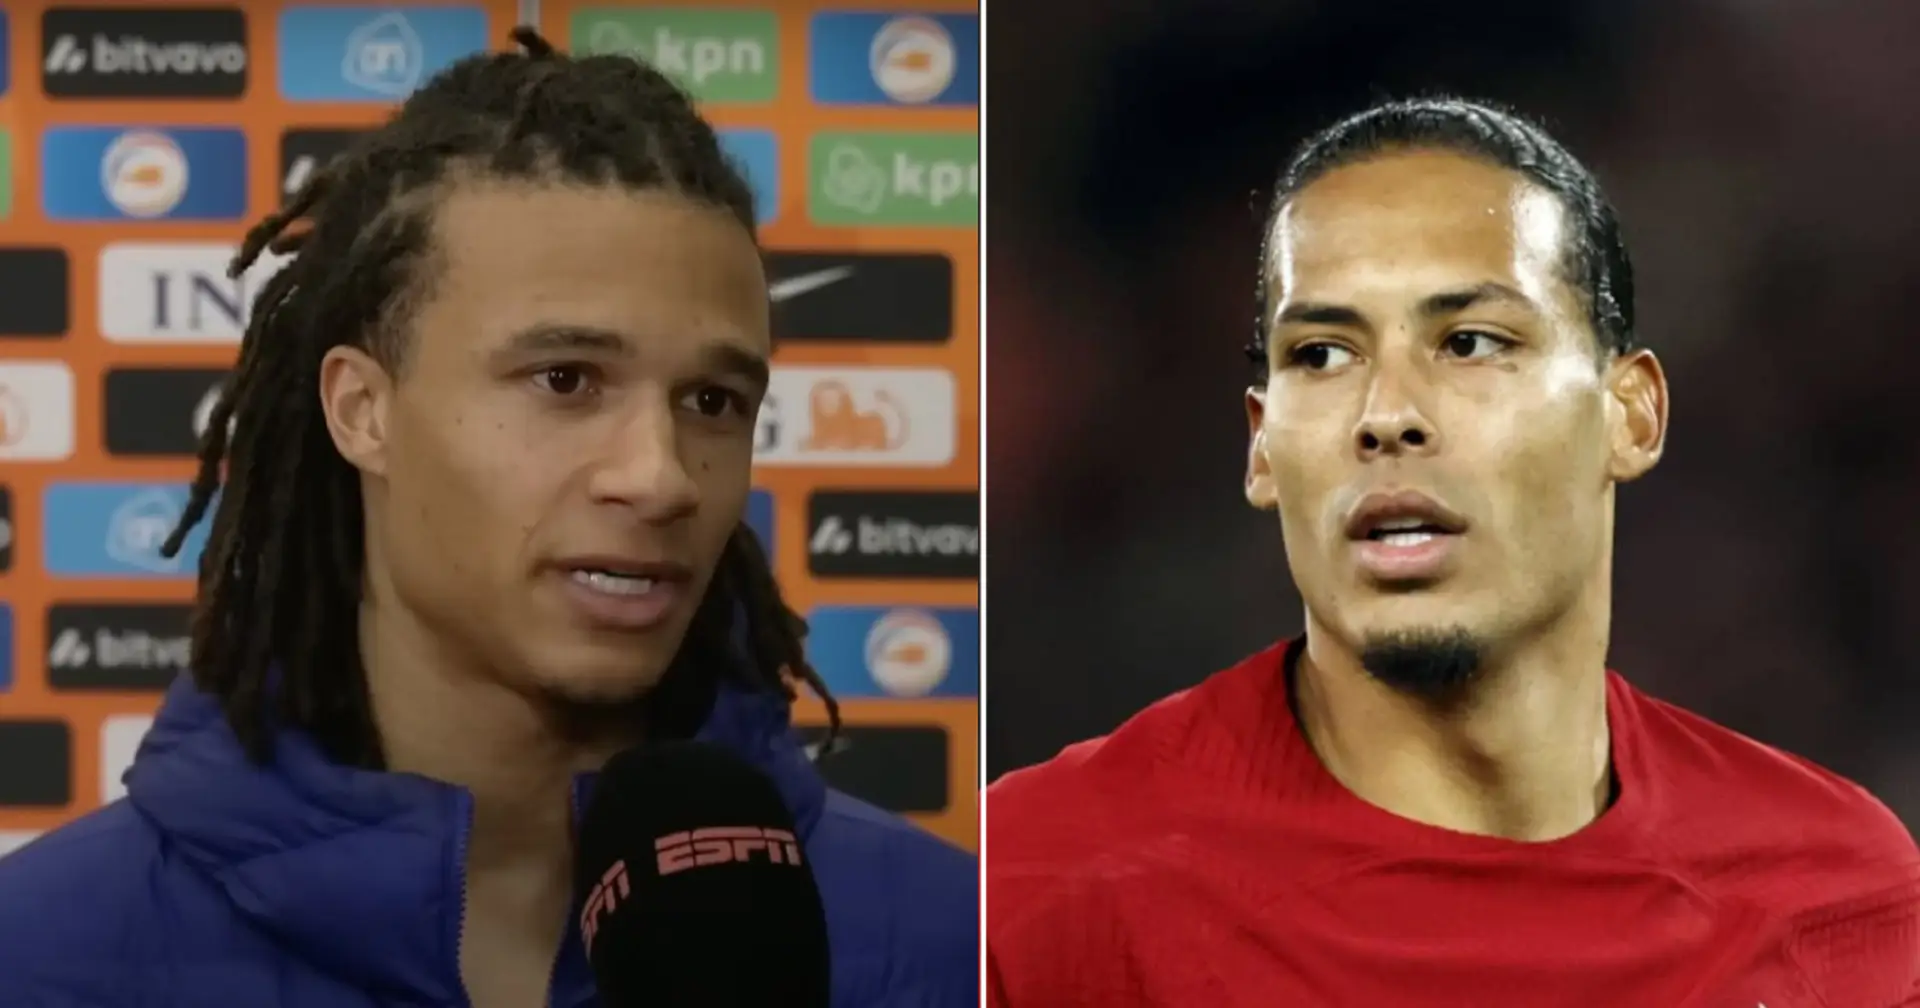 'People don't see how important he is': City defender Ake on playing with Van Dijk for Netherlands